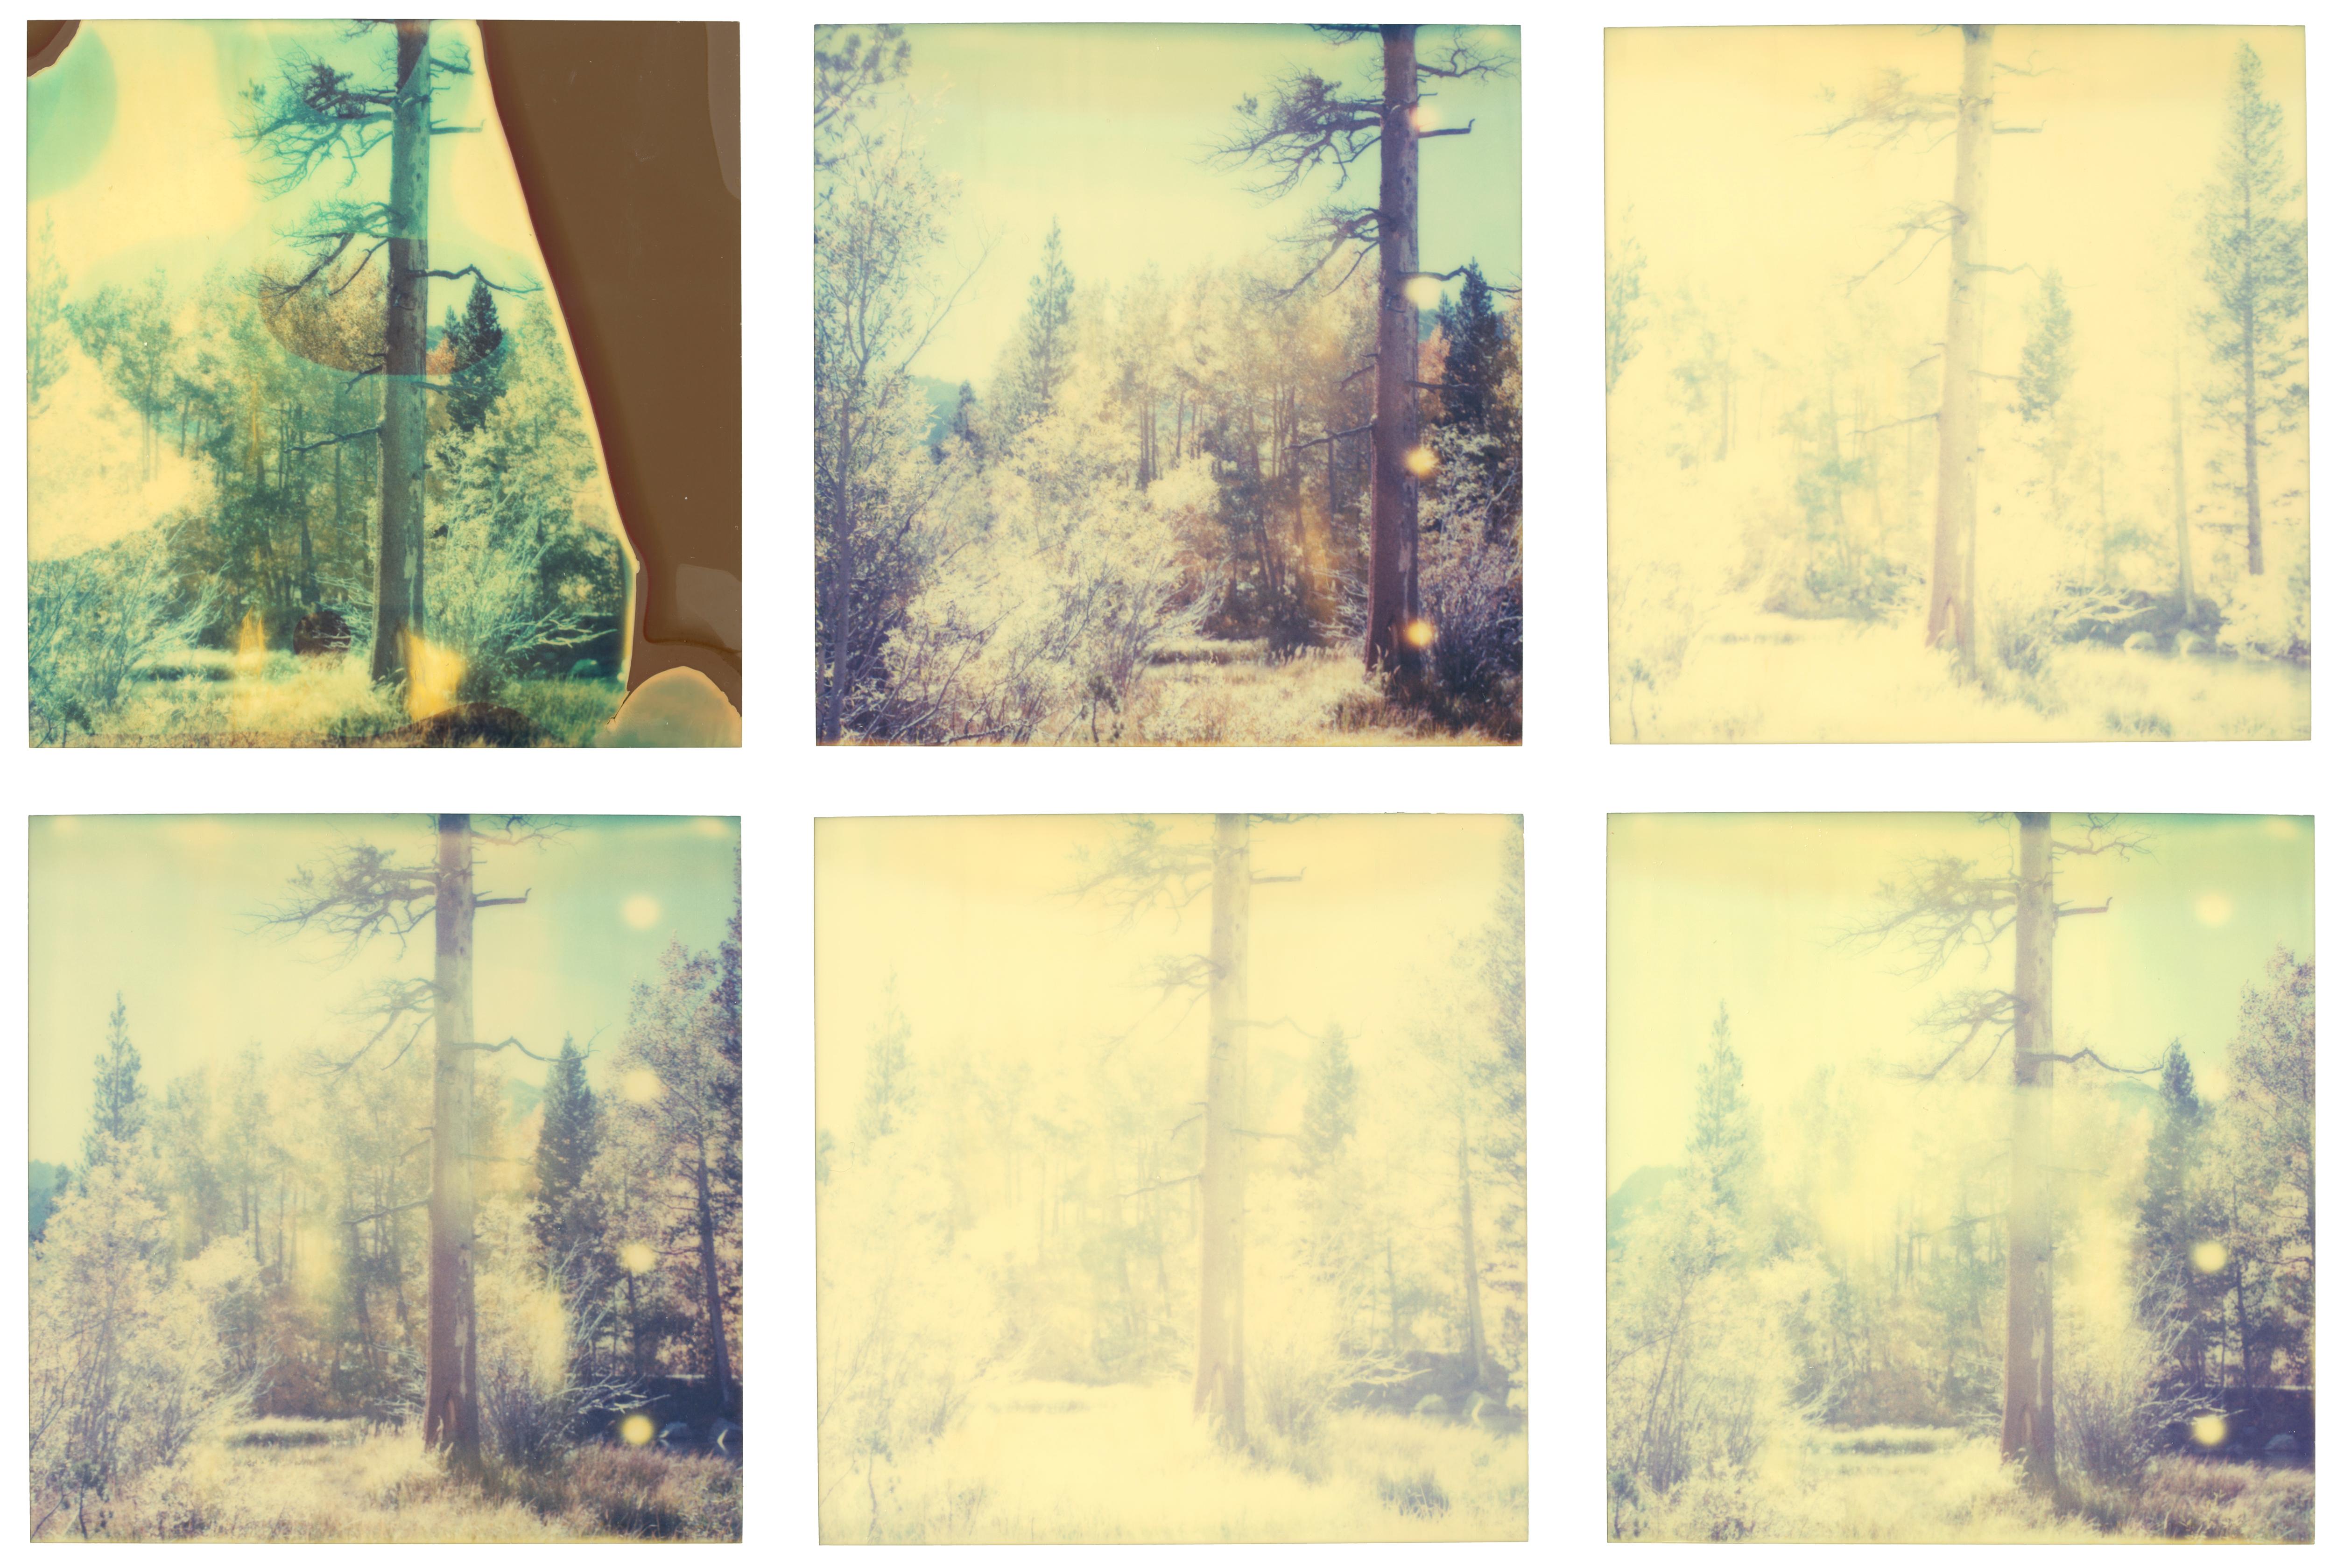 Stefanie Schneider Color Photograph - In the Range of Light III (Wastelands) - analog, Contemporary, Polaroid, Color